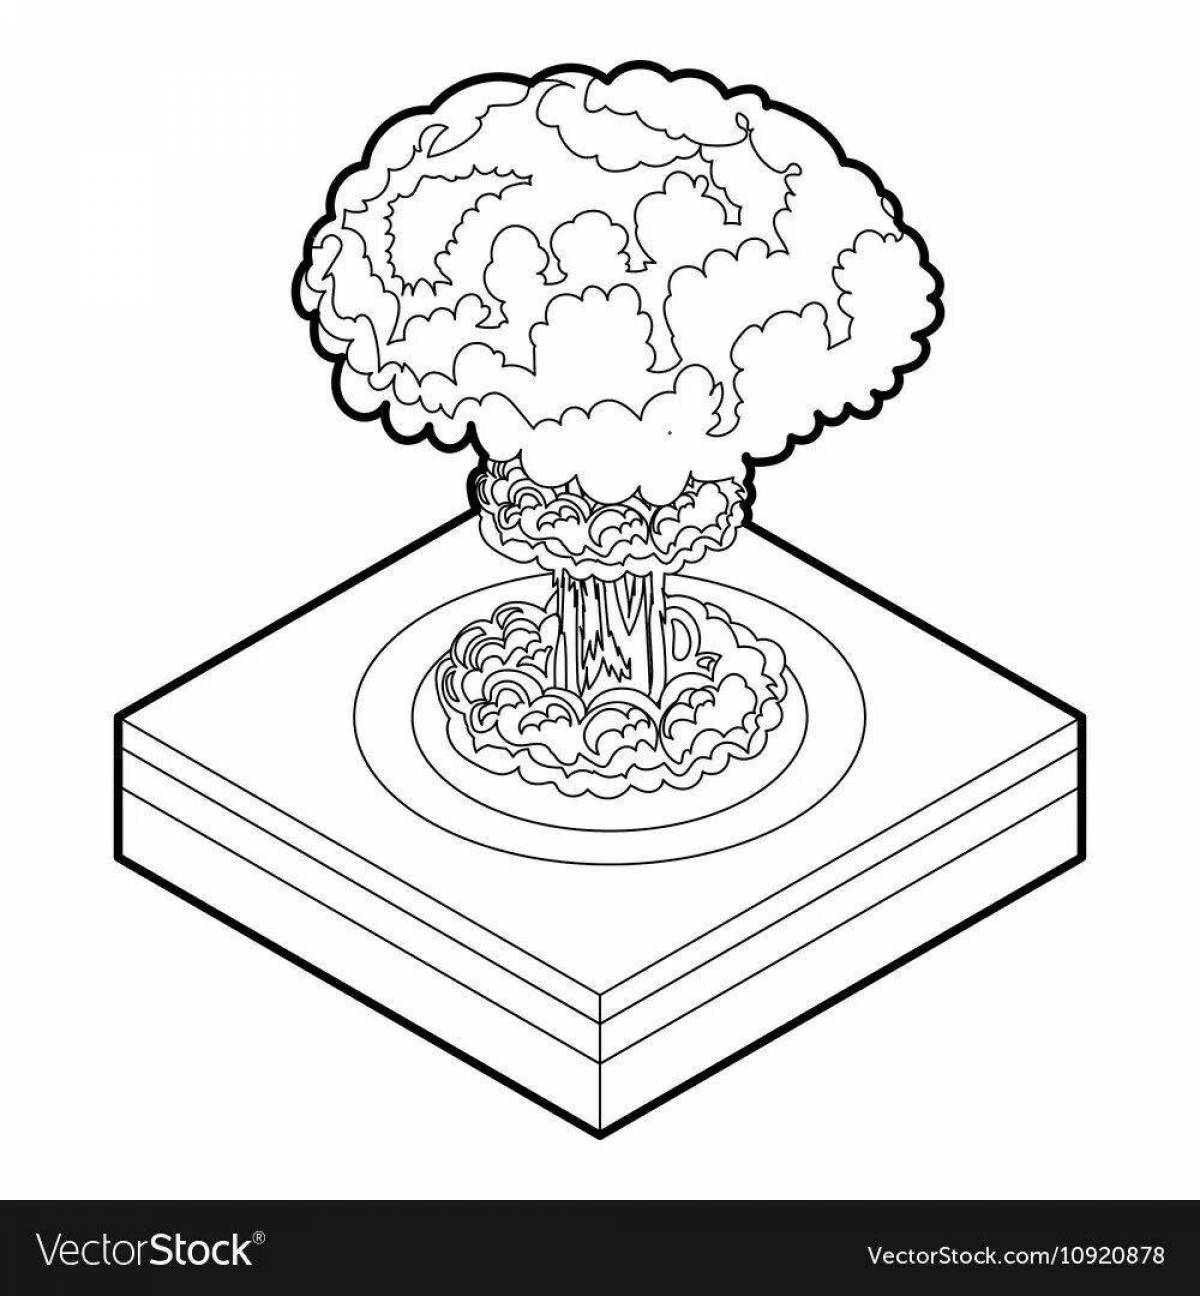 Roaring nuclear explosion coloring book